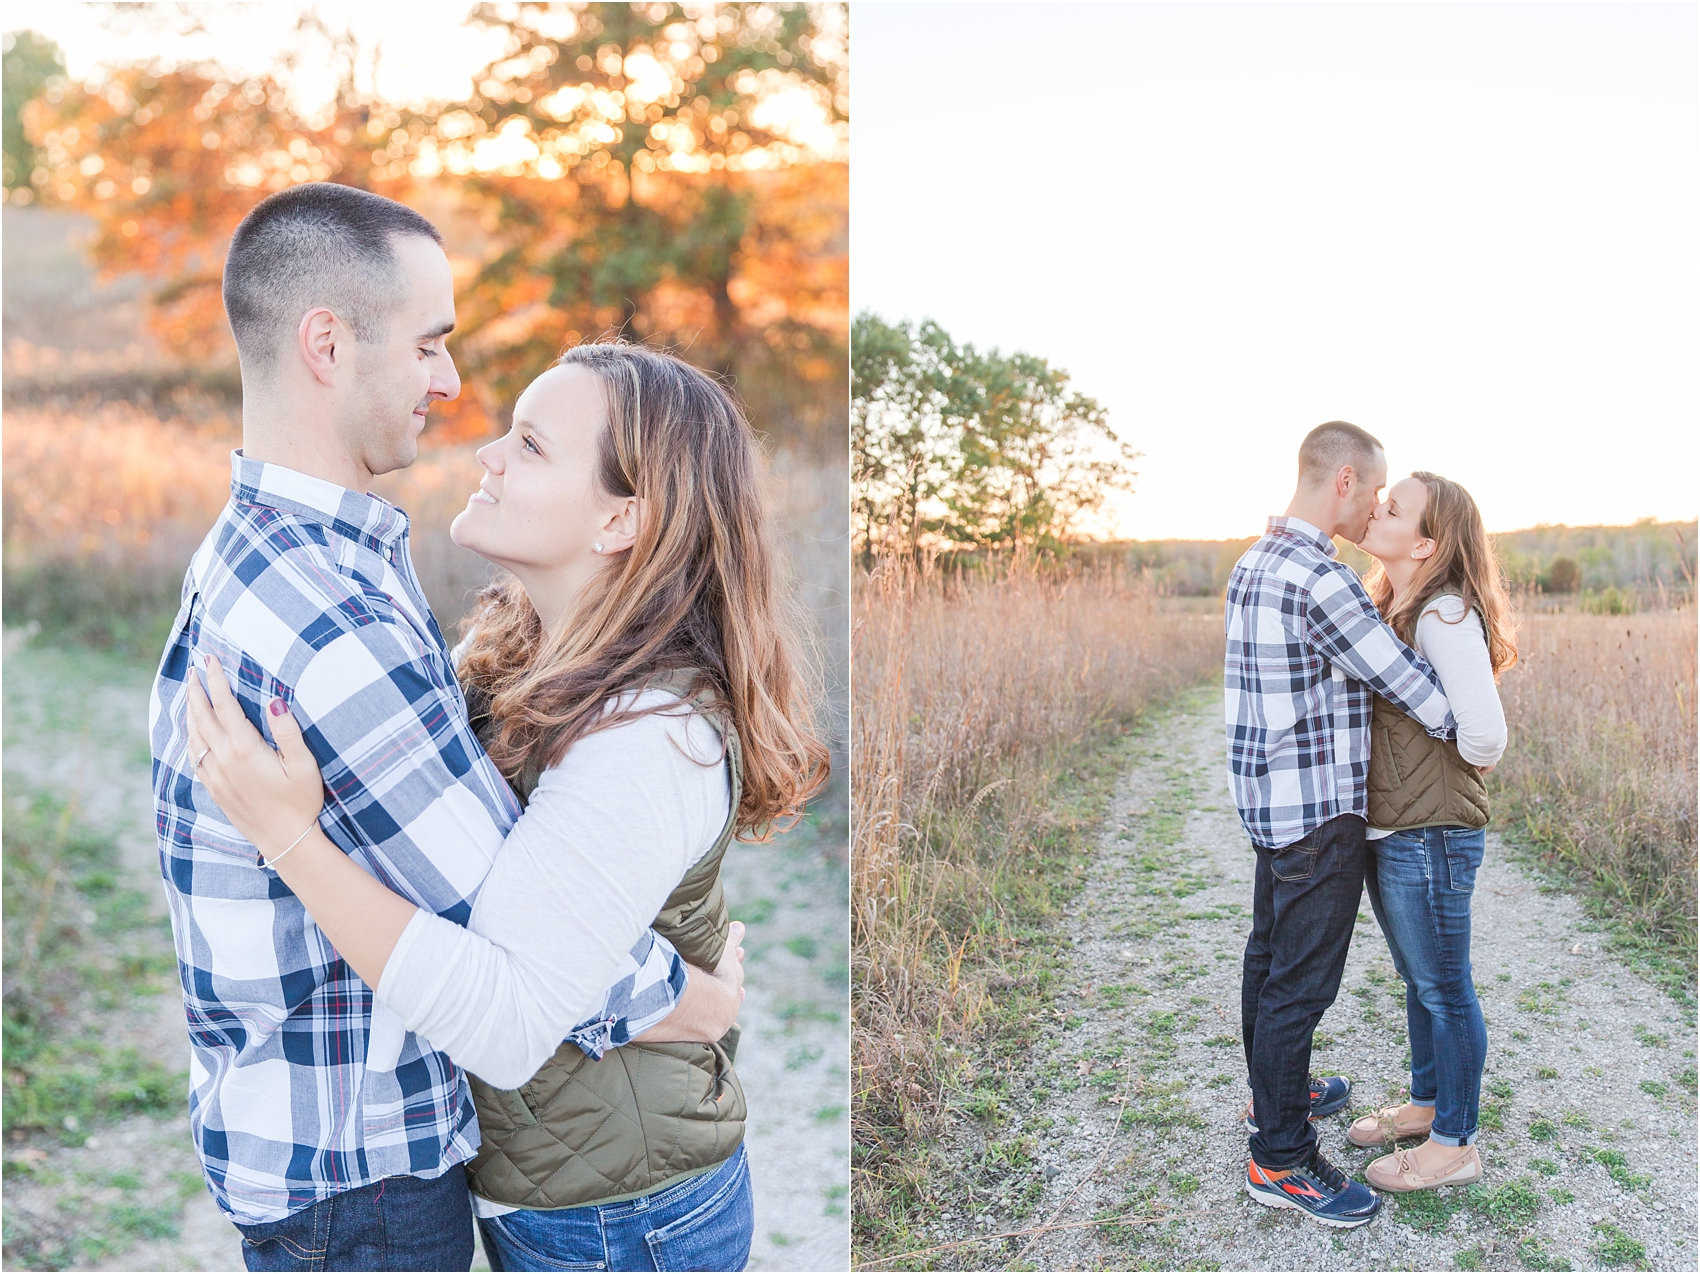 romantic-fall-engagement-photos-at-indian-springs-metropark-in-clarkston-mi-by-courtney-carolyn-photography_0024.jpg